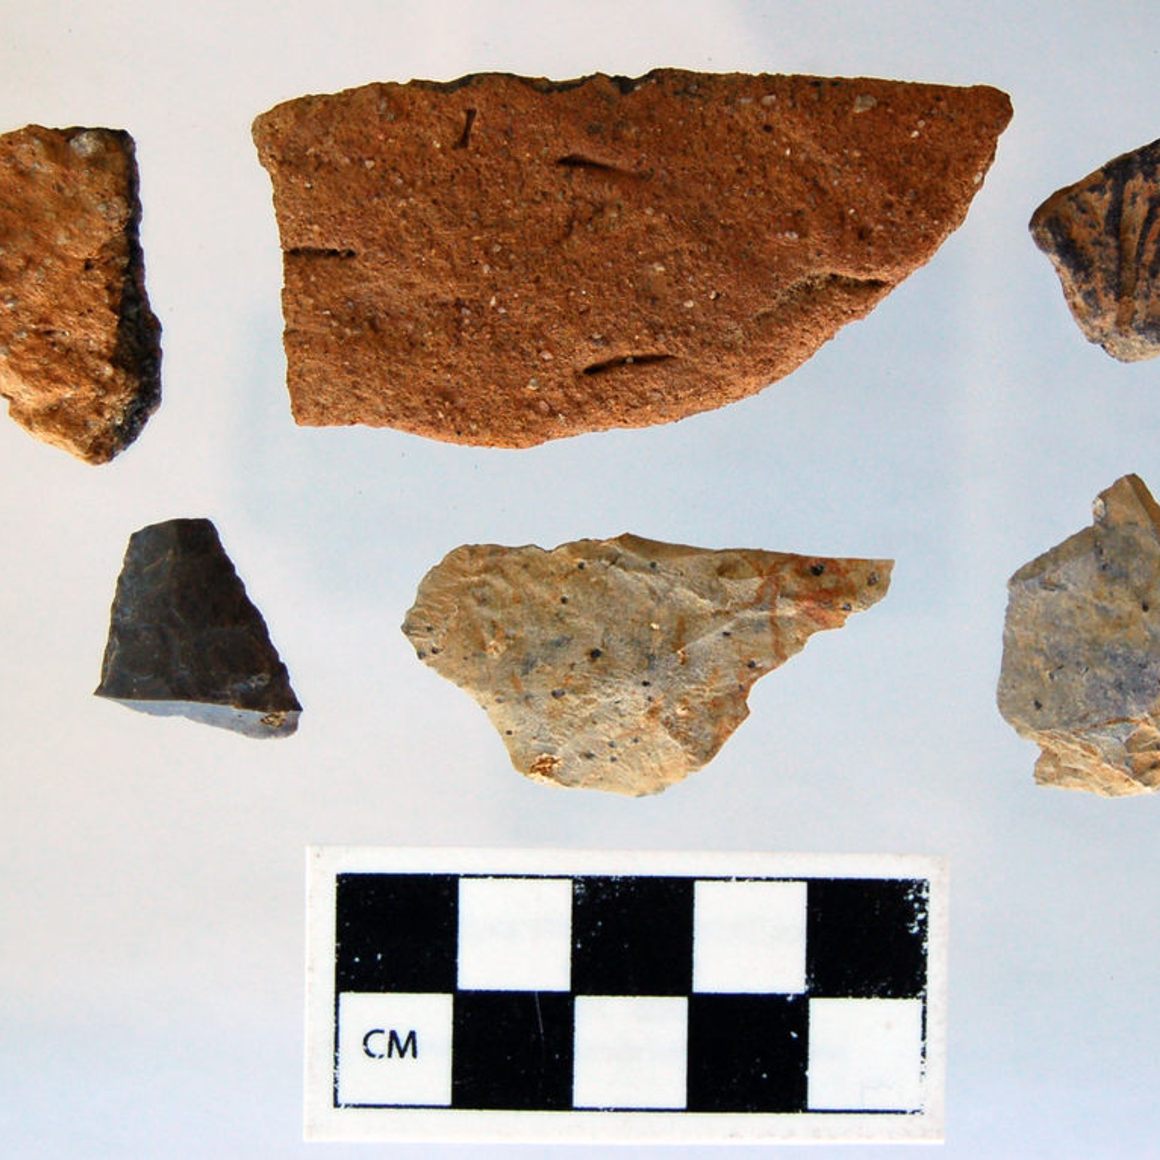 Prehistoric pottery shards and prehistoric lithics, ranging from 500 to 3,000 years of age.